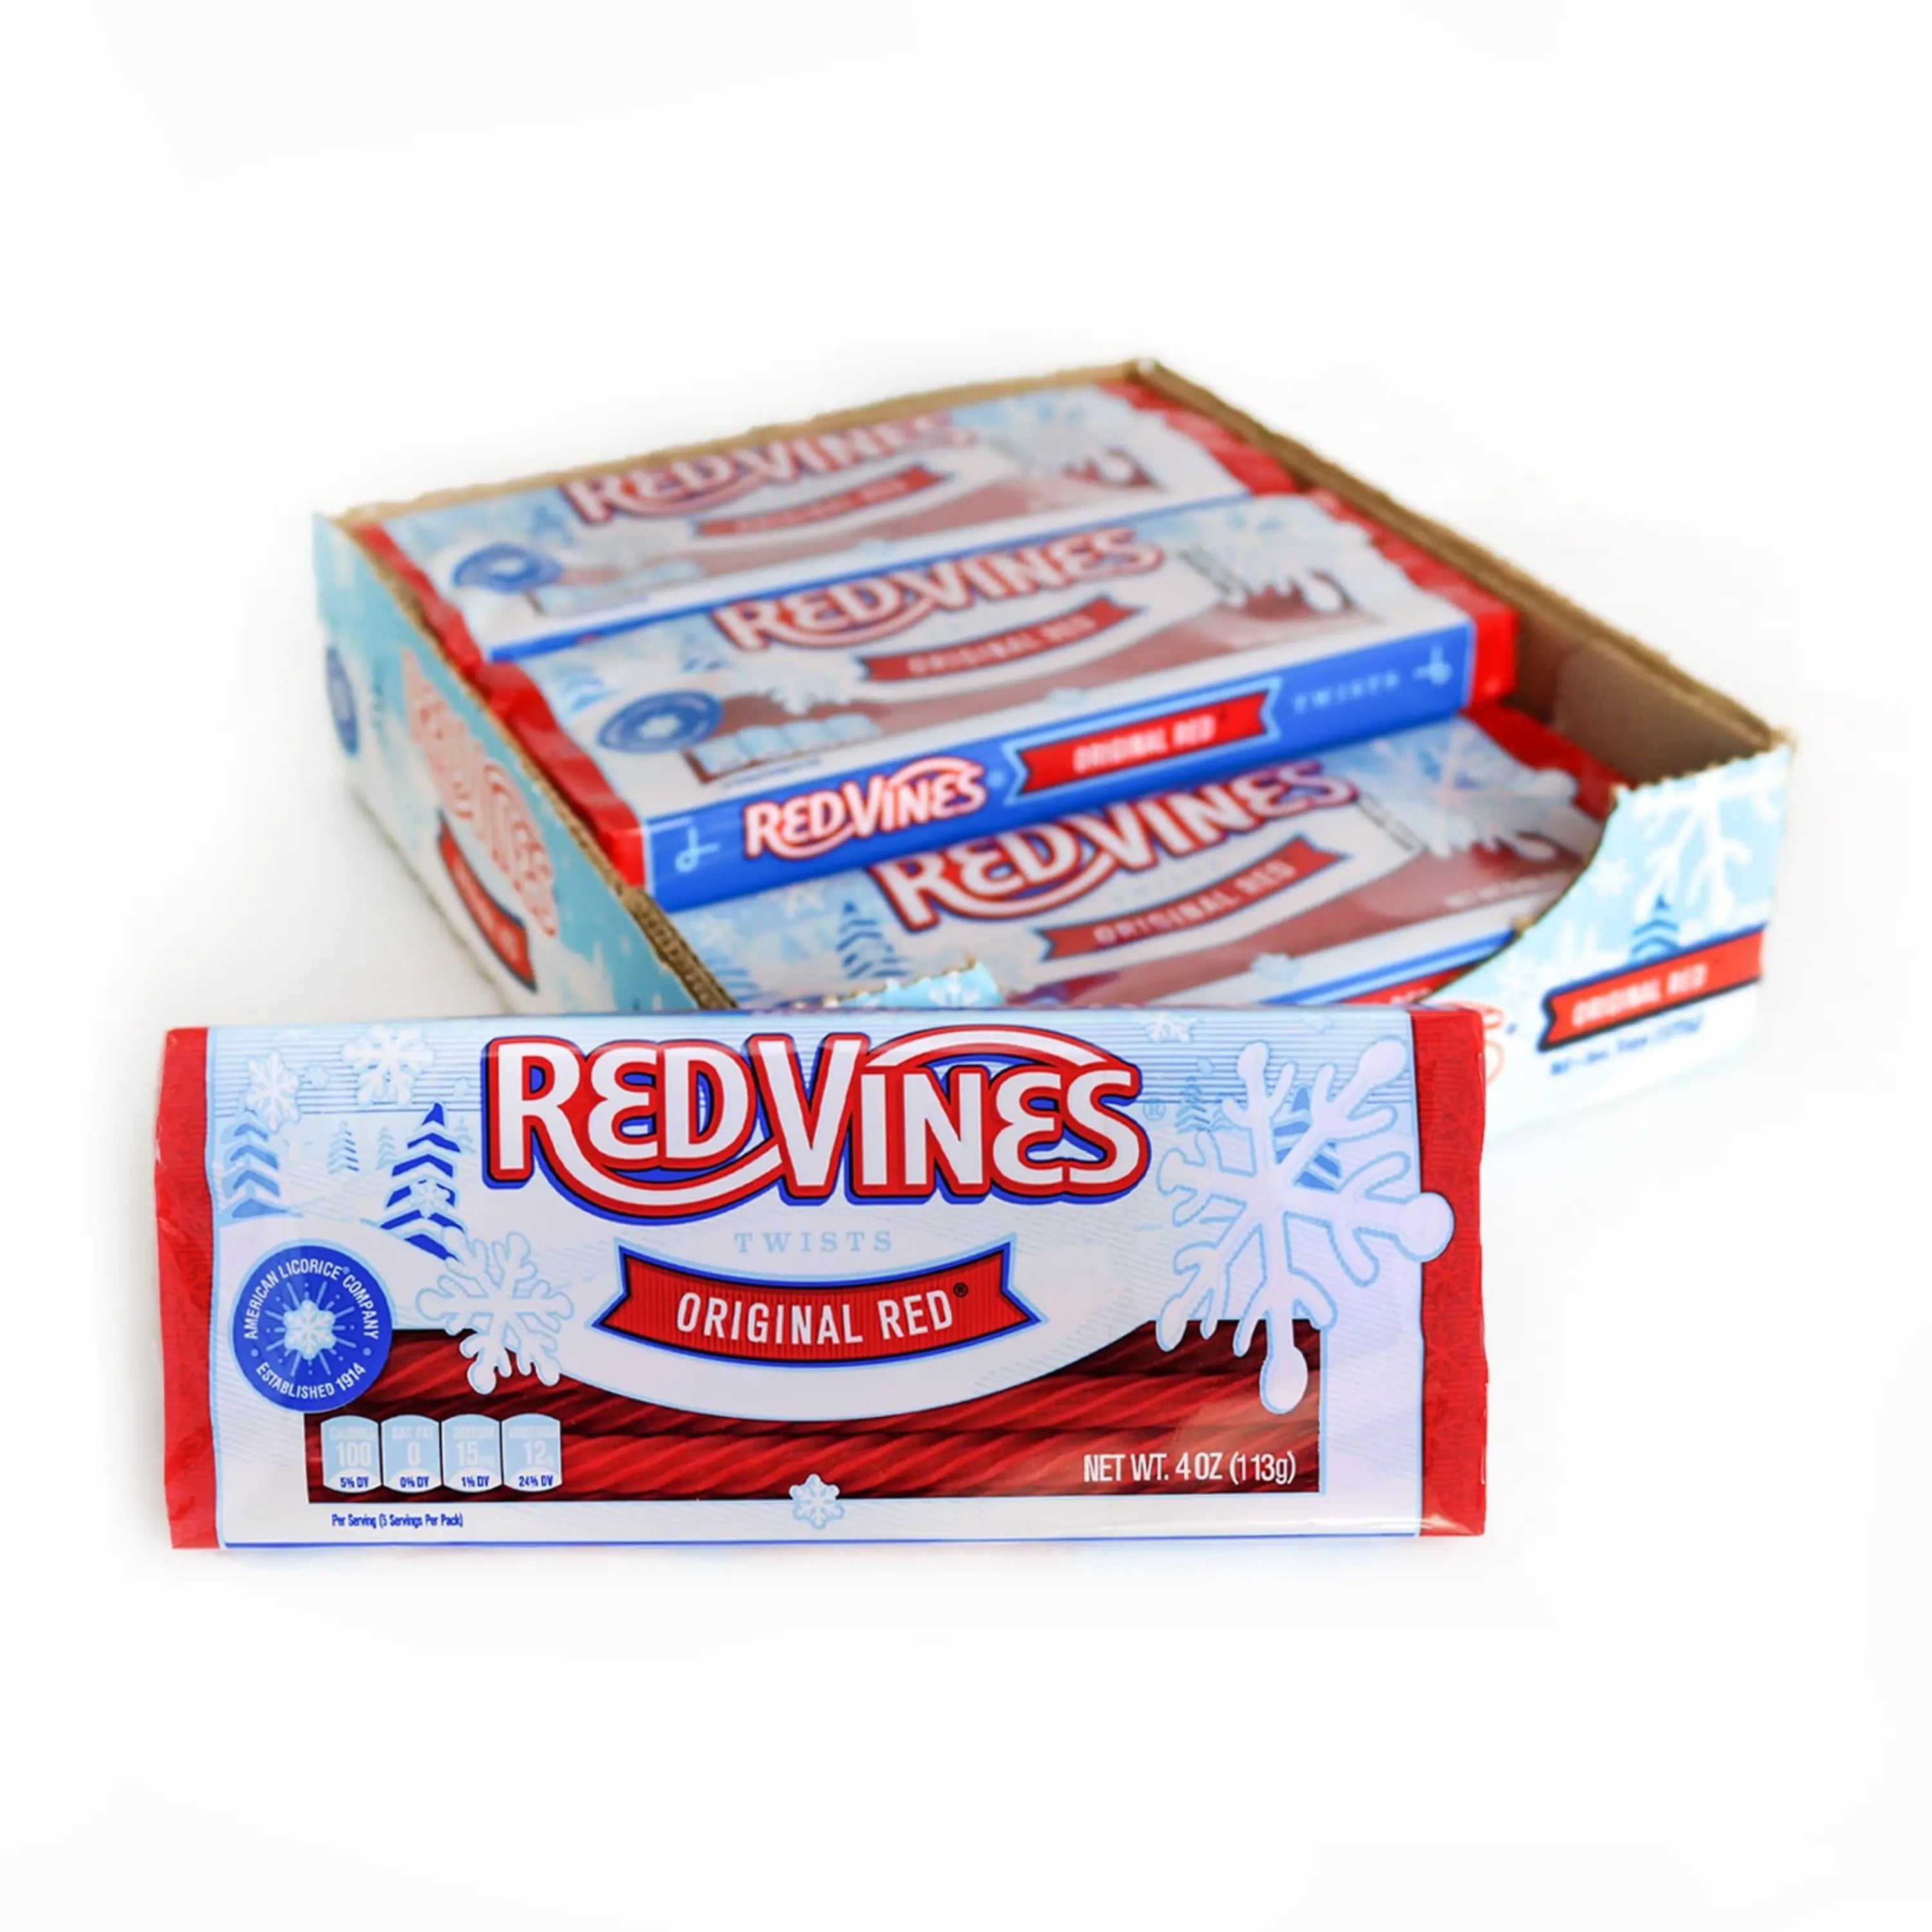 RED VINES Original Red Licorice Twists in winter seasonal tray - 9 pack